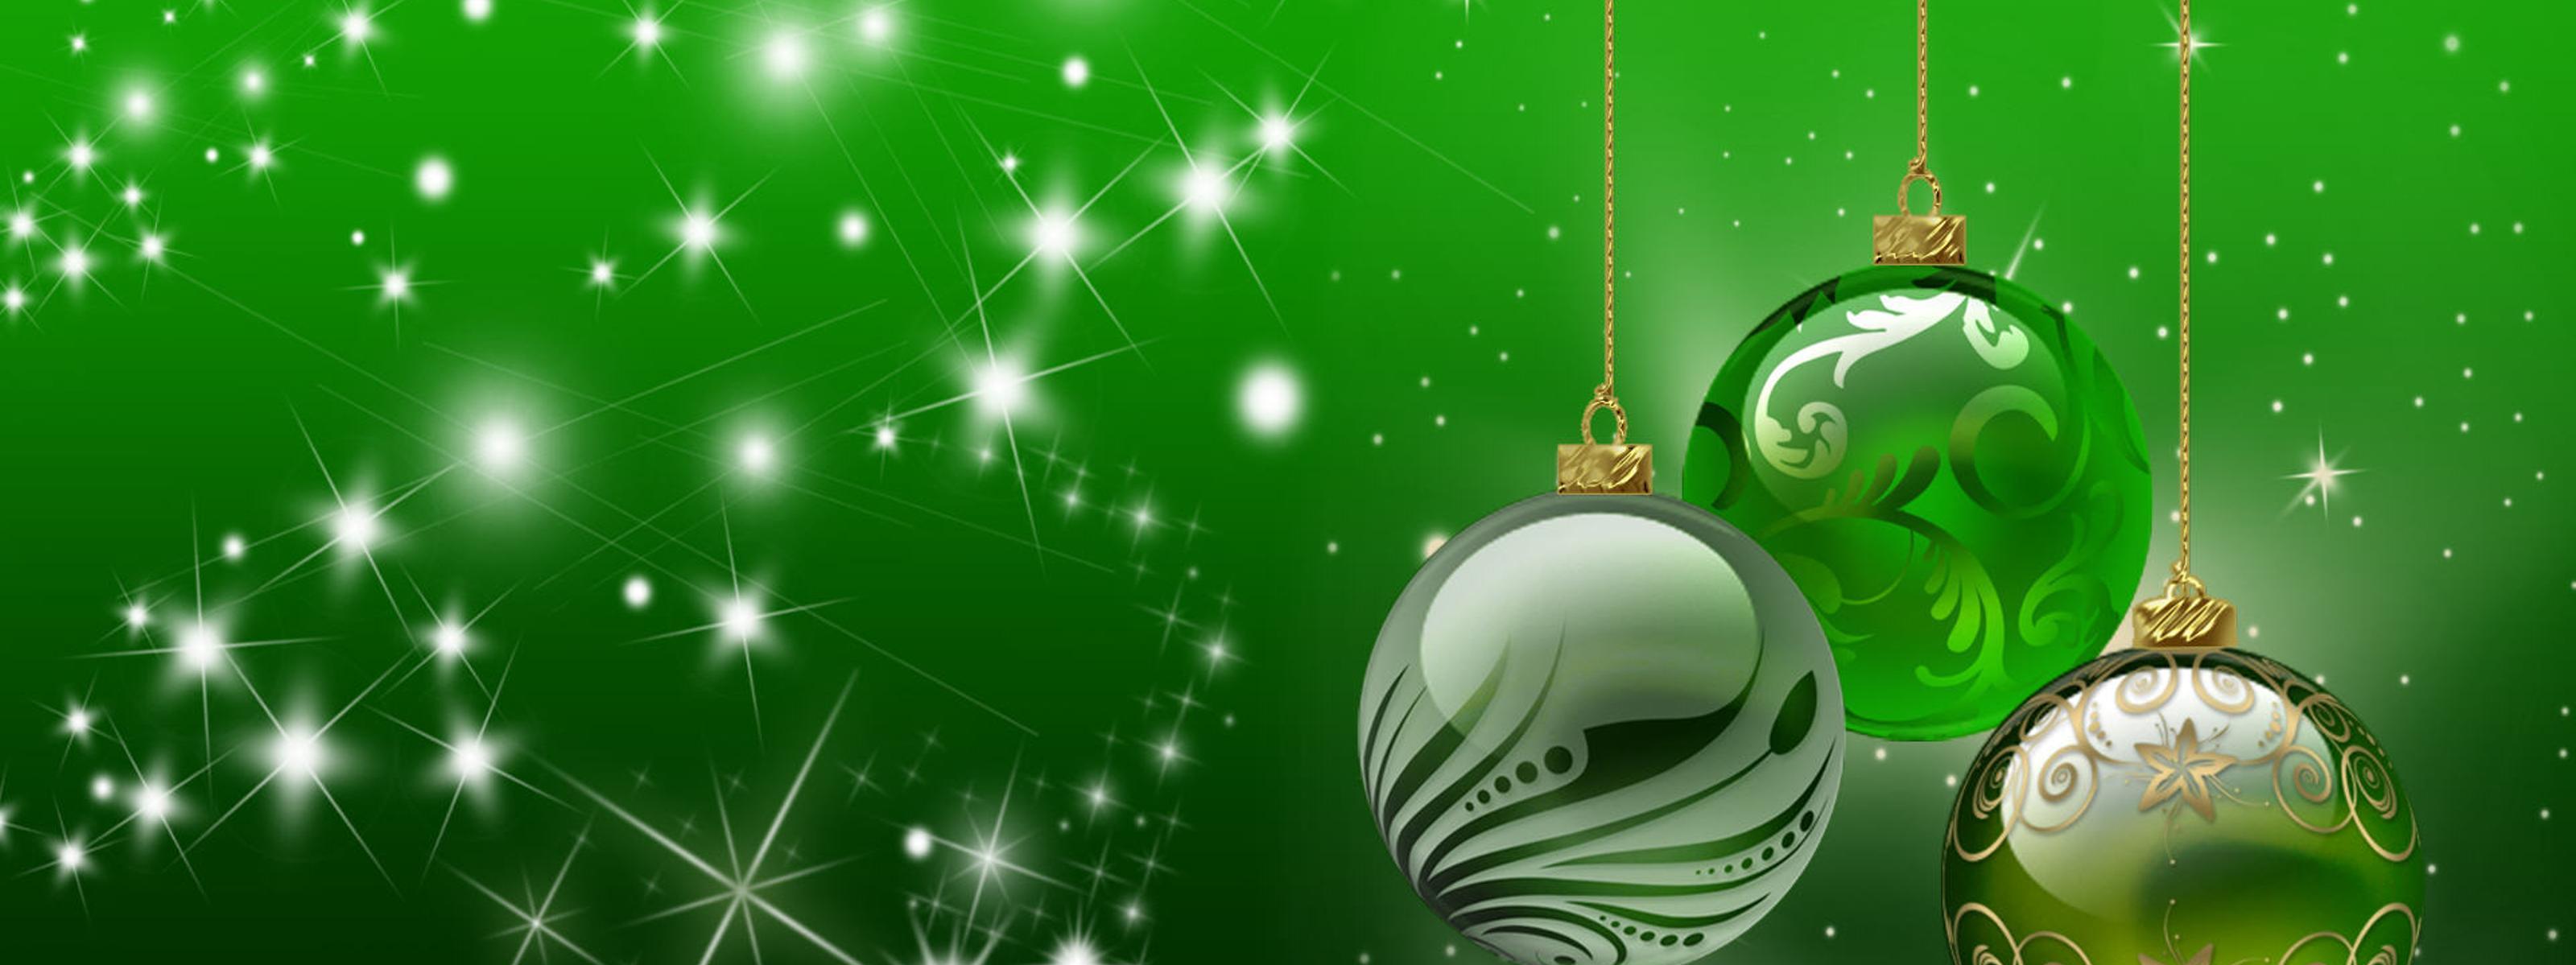 Green Holiday Wallpaper Christmas Accessories